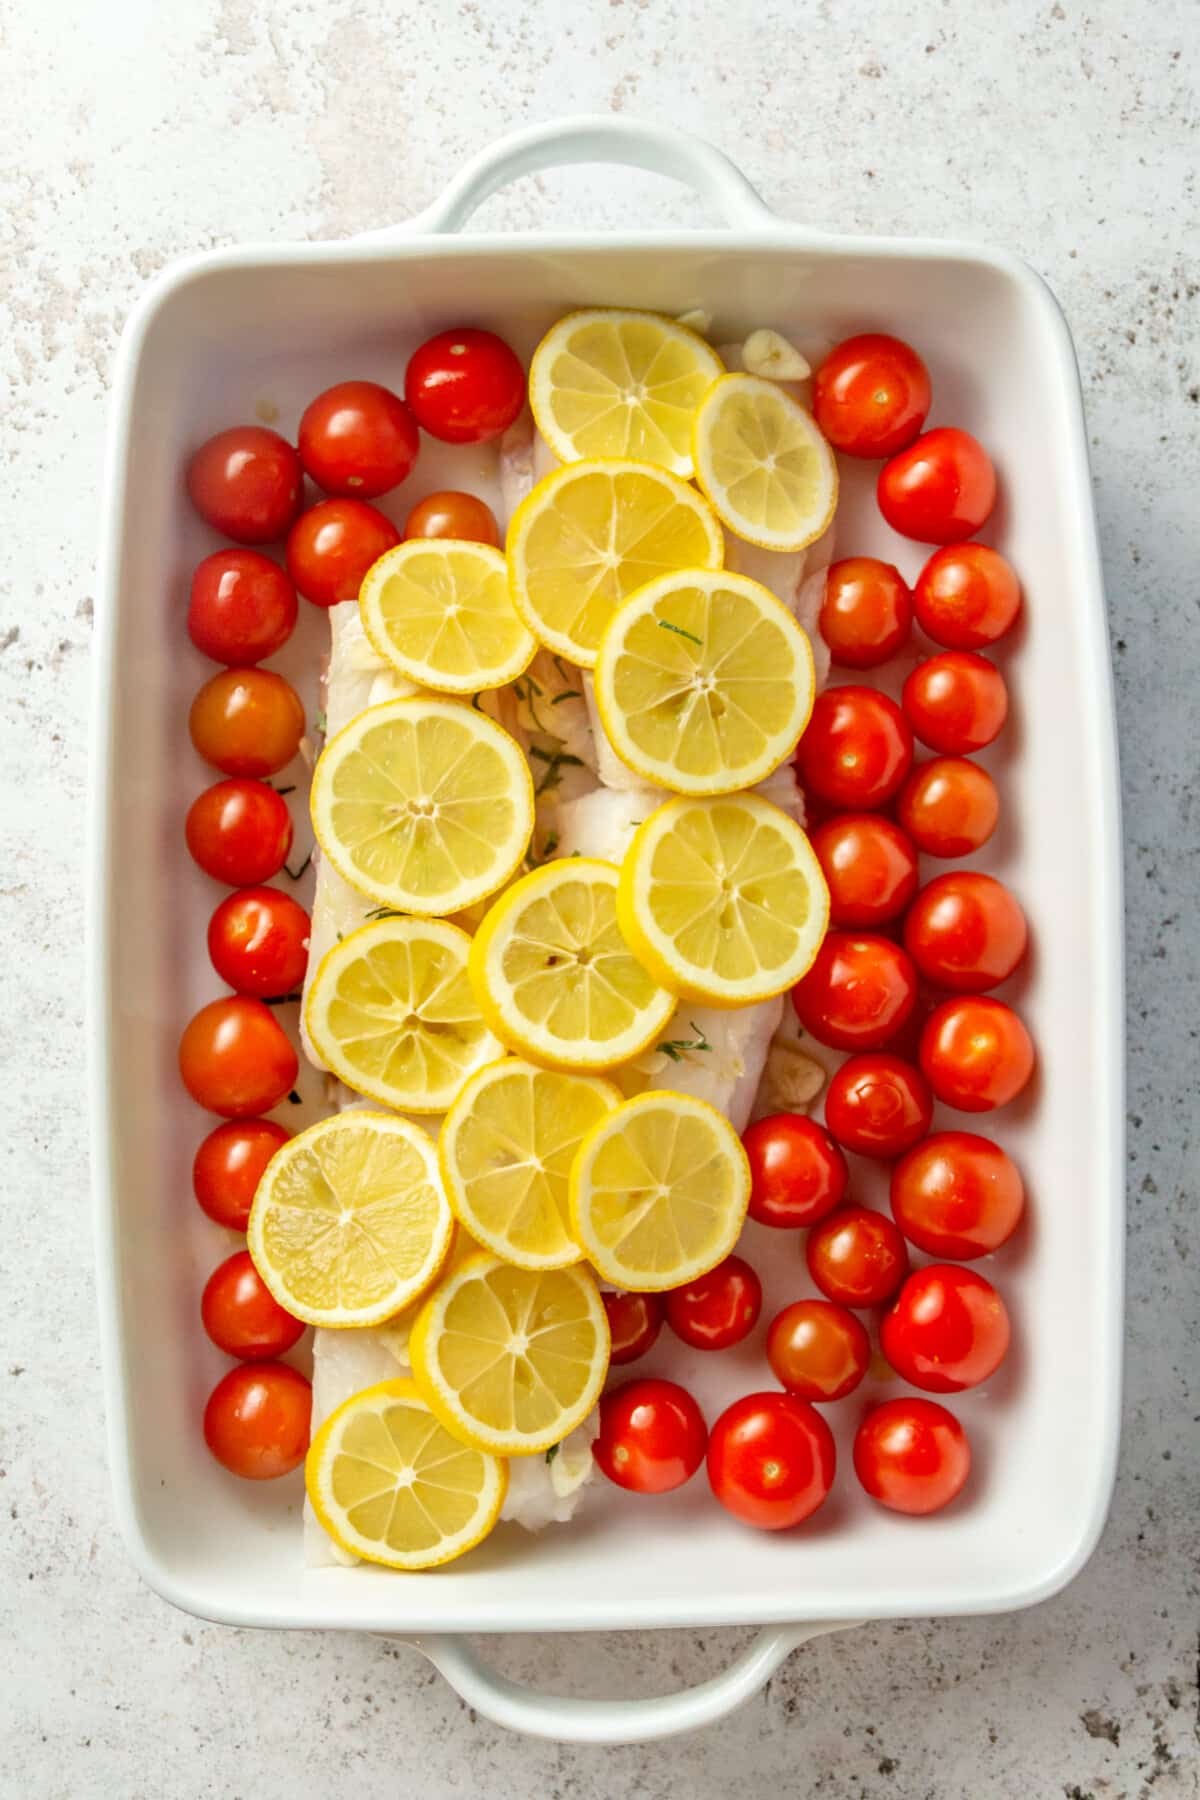 Cod filets and cherry tomatoes sit in a white rectangular baking dish. Slices of lemon sit on top.